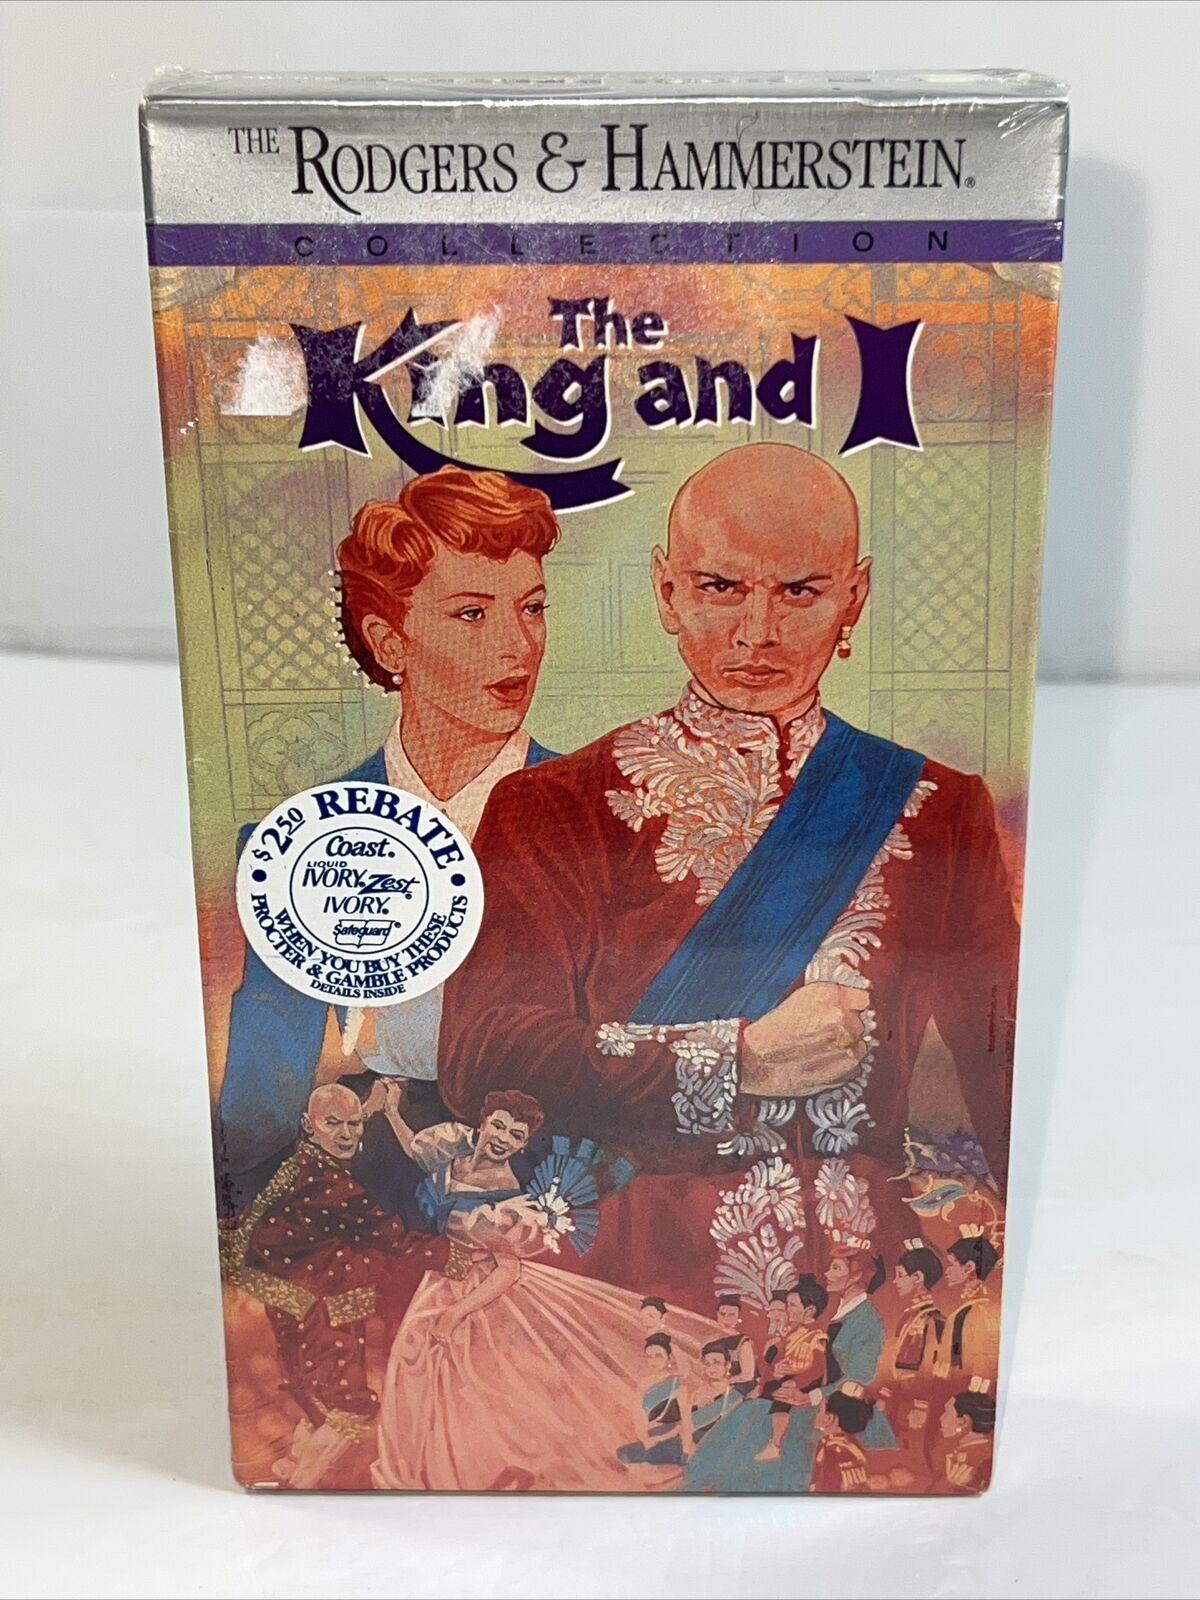 The King and I - Rogers & Hammerstein Musical (1991) VHS Factory Sealed! Grote waarde, populariteit?